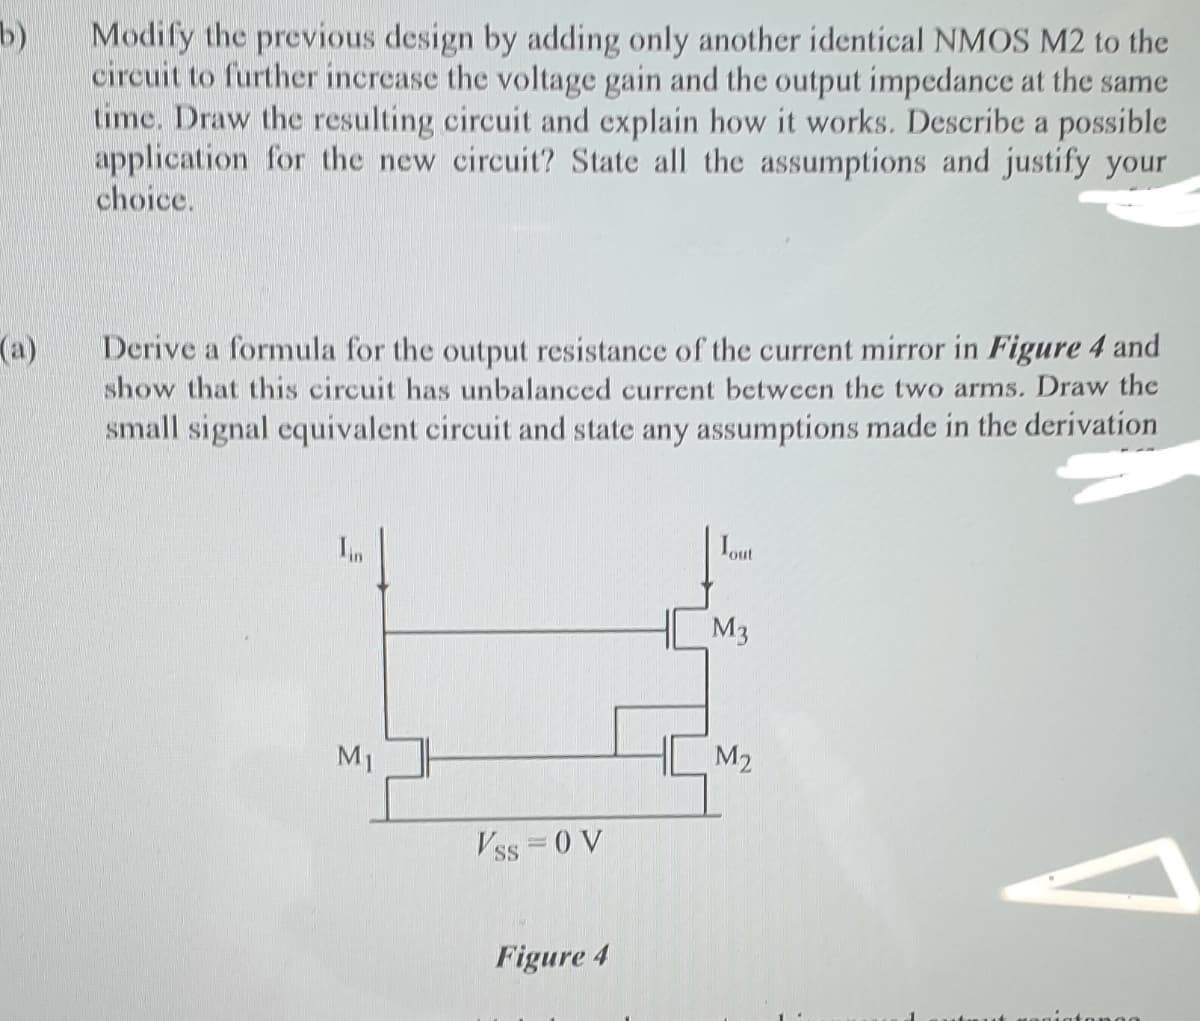 b)
Modify the previous design by adding only another identical NMOS M2 to the
circuit to further increase the voltage gain and the output impedance at the same
time. Draw the resulting circuit and explain how it works. Describe a possible
application for the new circuit? State all the assumptions and justify your
choice.
(a)
show that this circuit has unbalanced current between the two arms. Draw the
small signal equivalent circuit and state any assumptions made in the derivation
Derive a formula for the output resistance of the current mirror in Figure 4 and
In
Iout
M3
M1
M2
Vss = 0 V
Figure 4
